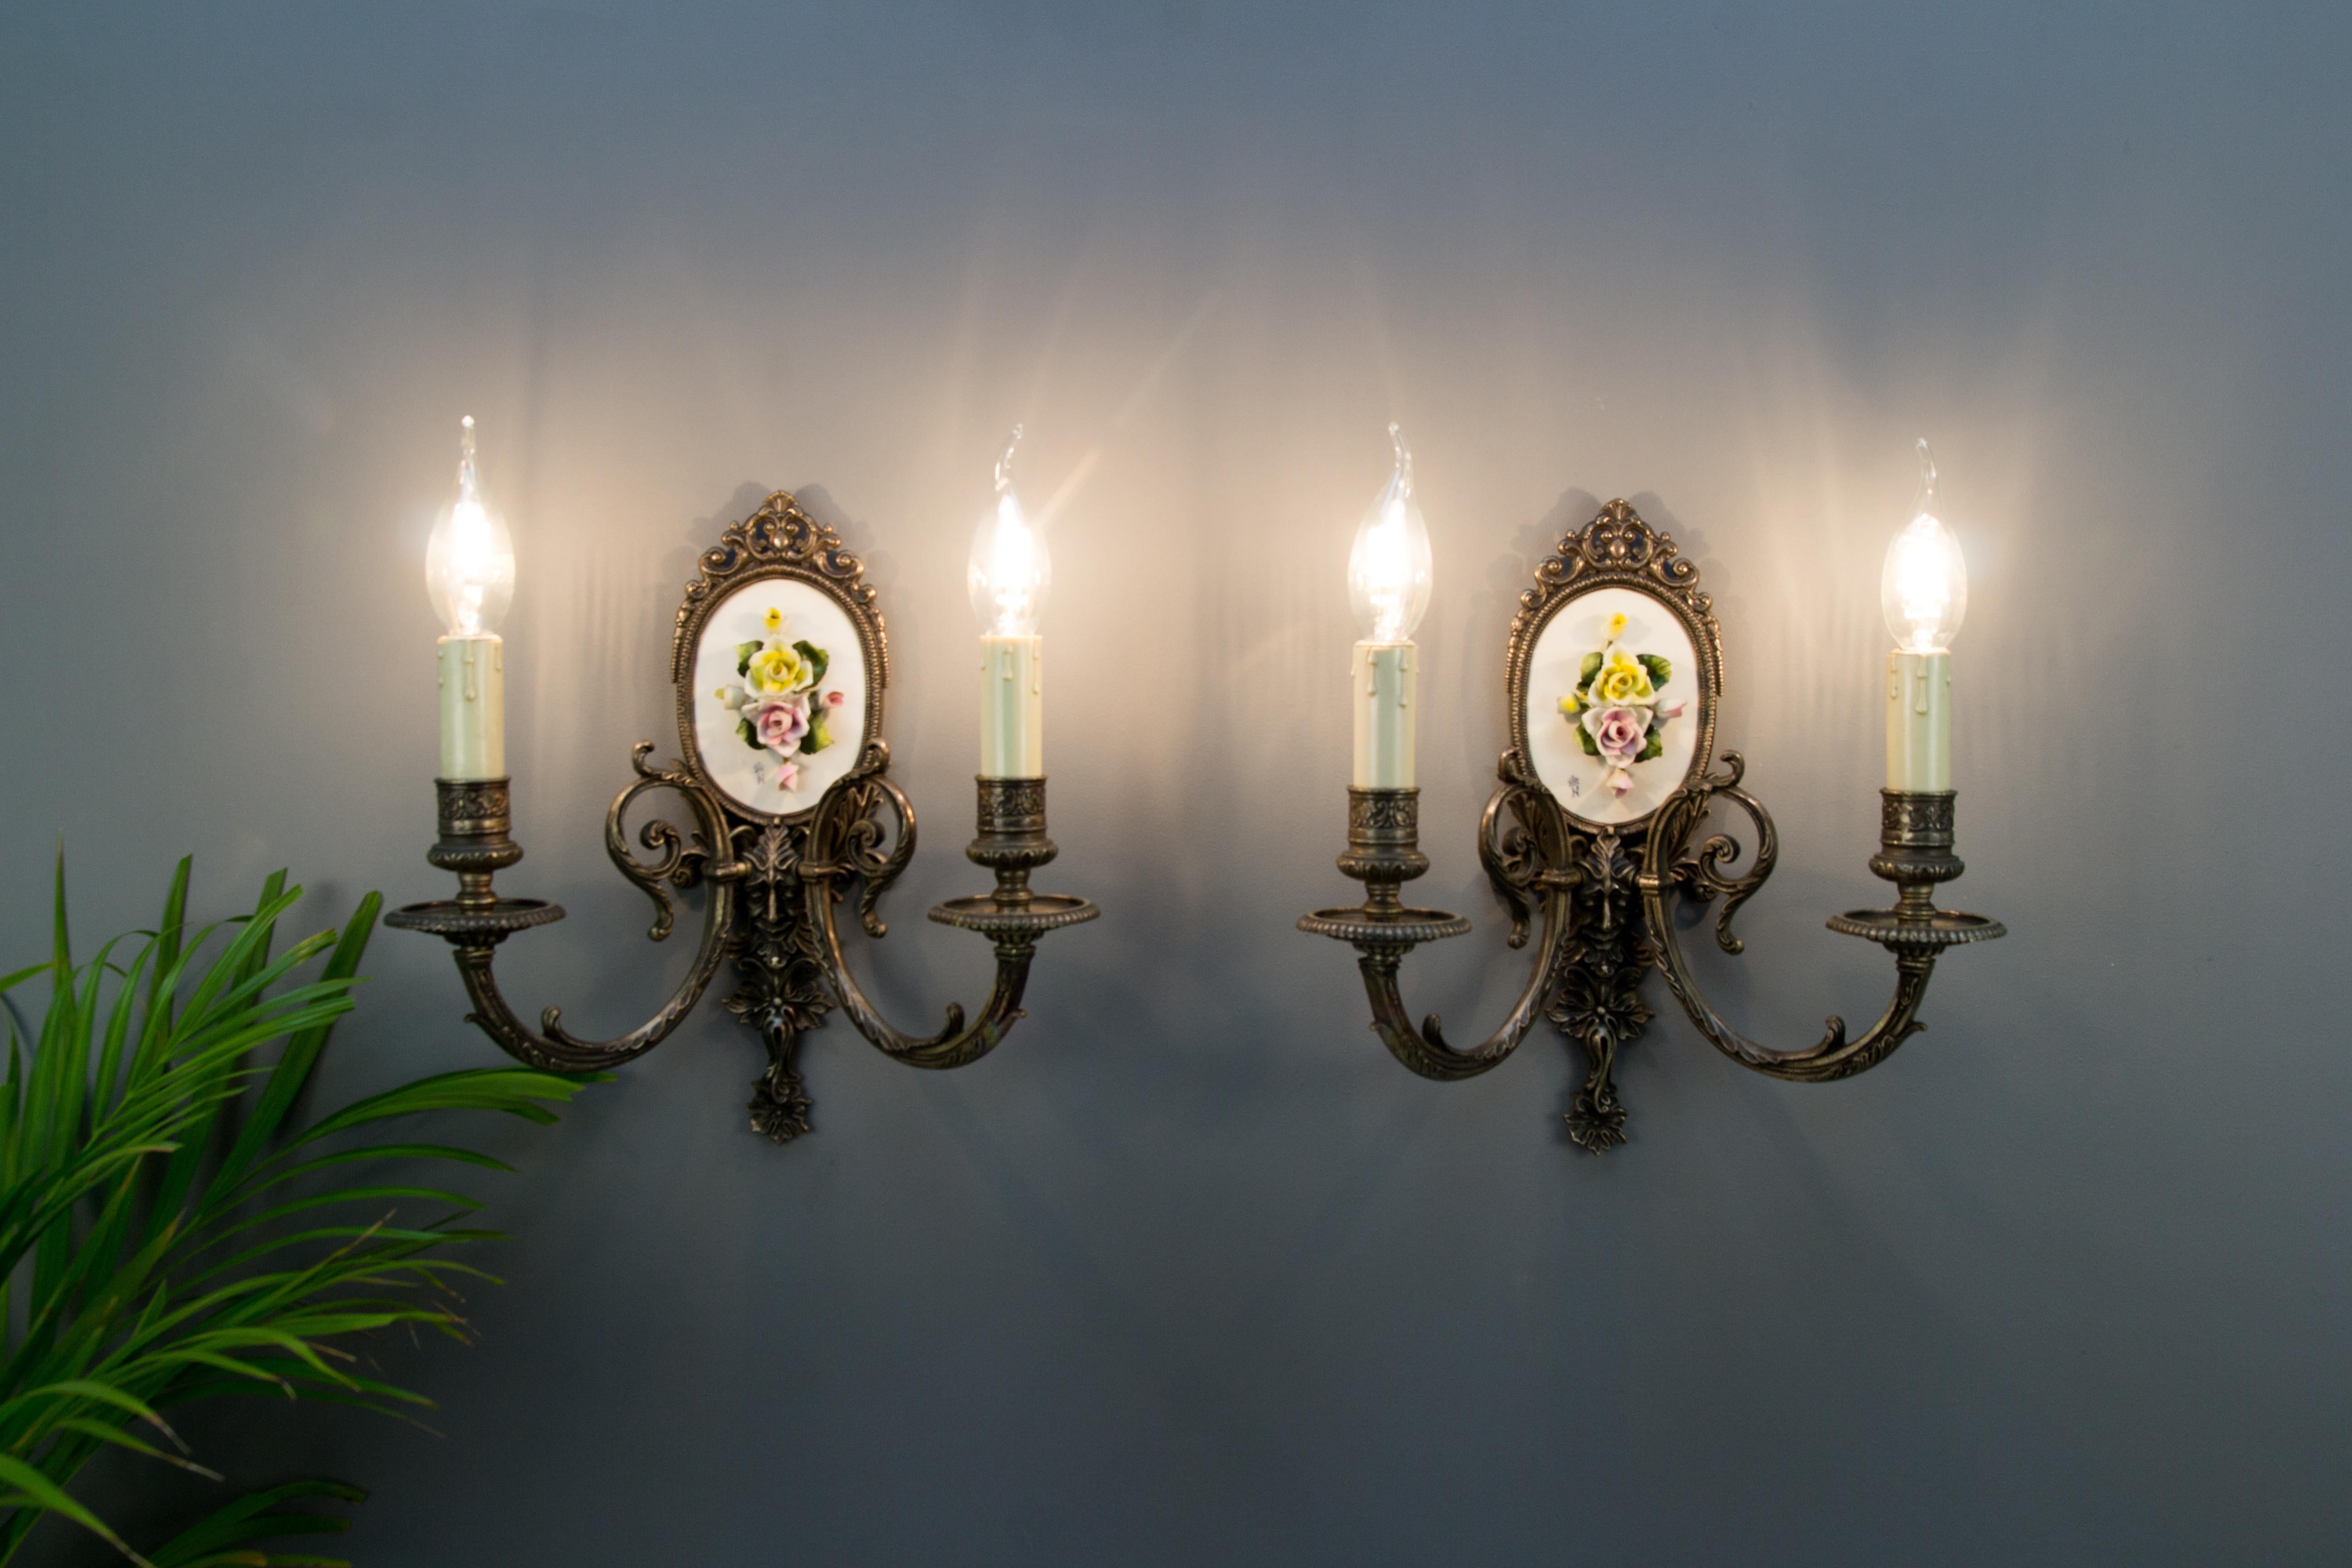 Pair of Mid-20th Century Italian Capodimonte Porcelain and Brass Sconces 1